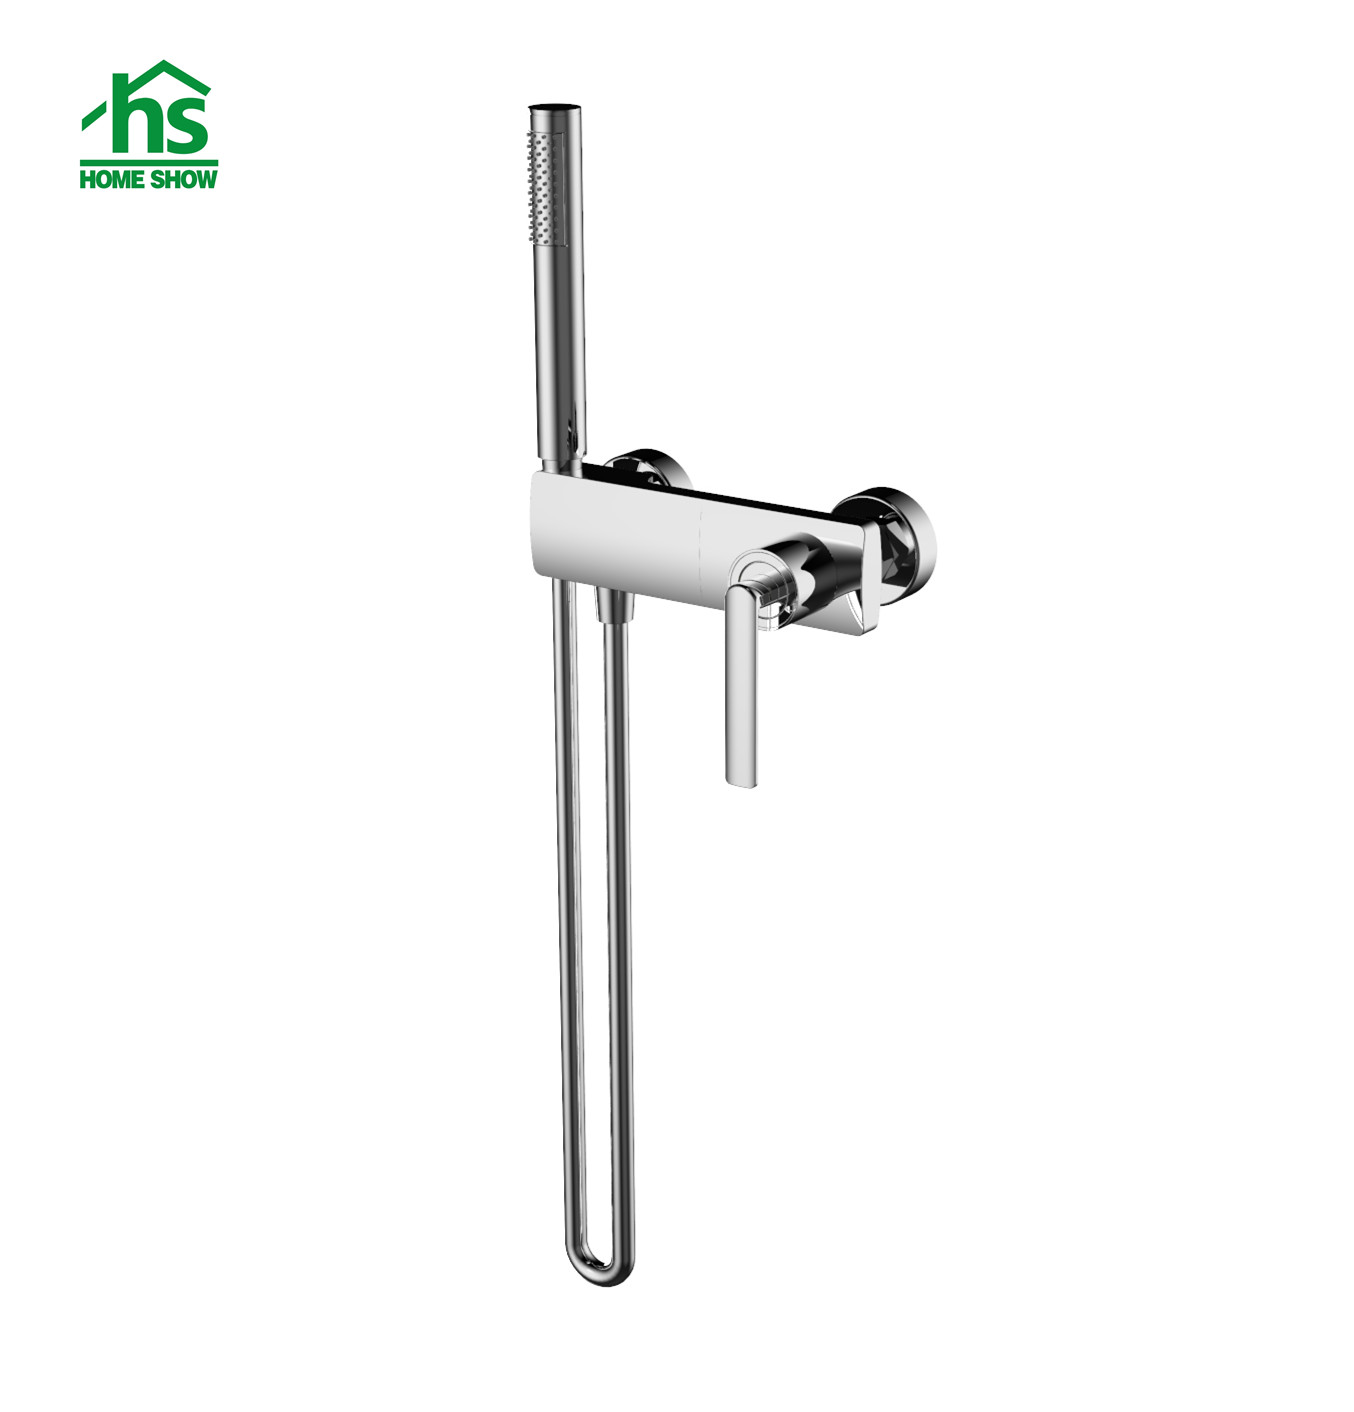 Factory Supply Chrome Brass Material Bath and Shower Faucet Mixer for Bathroom D42 1001